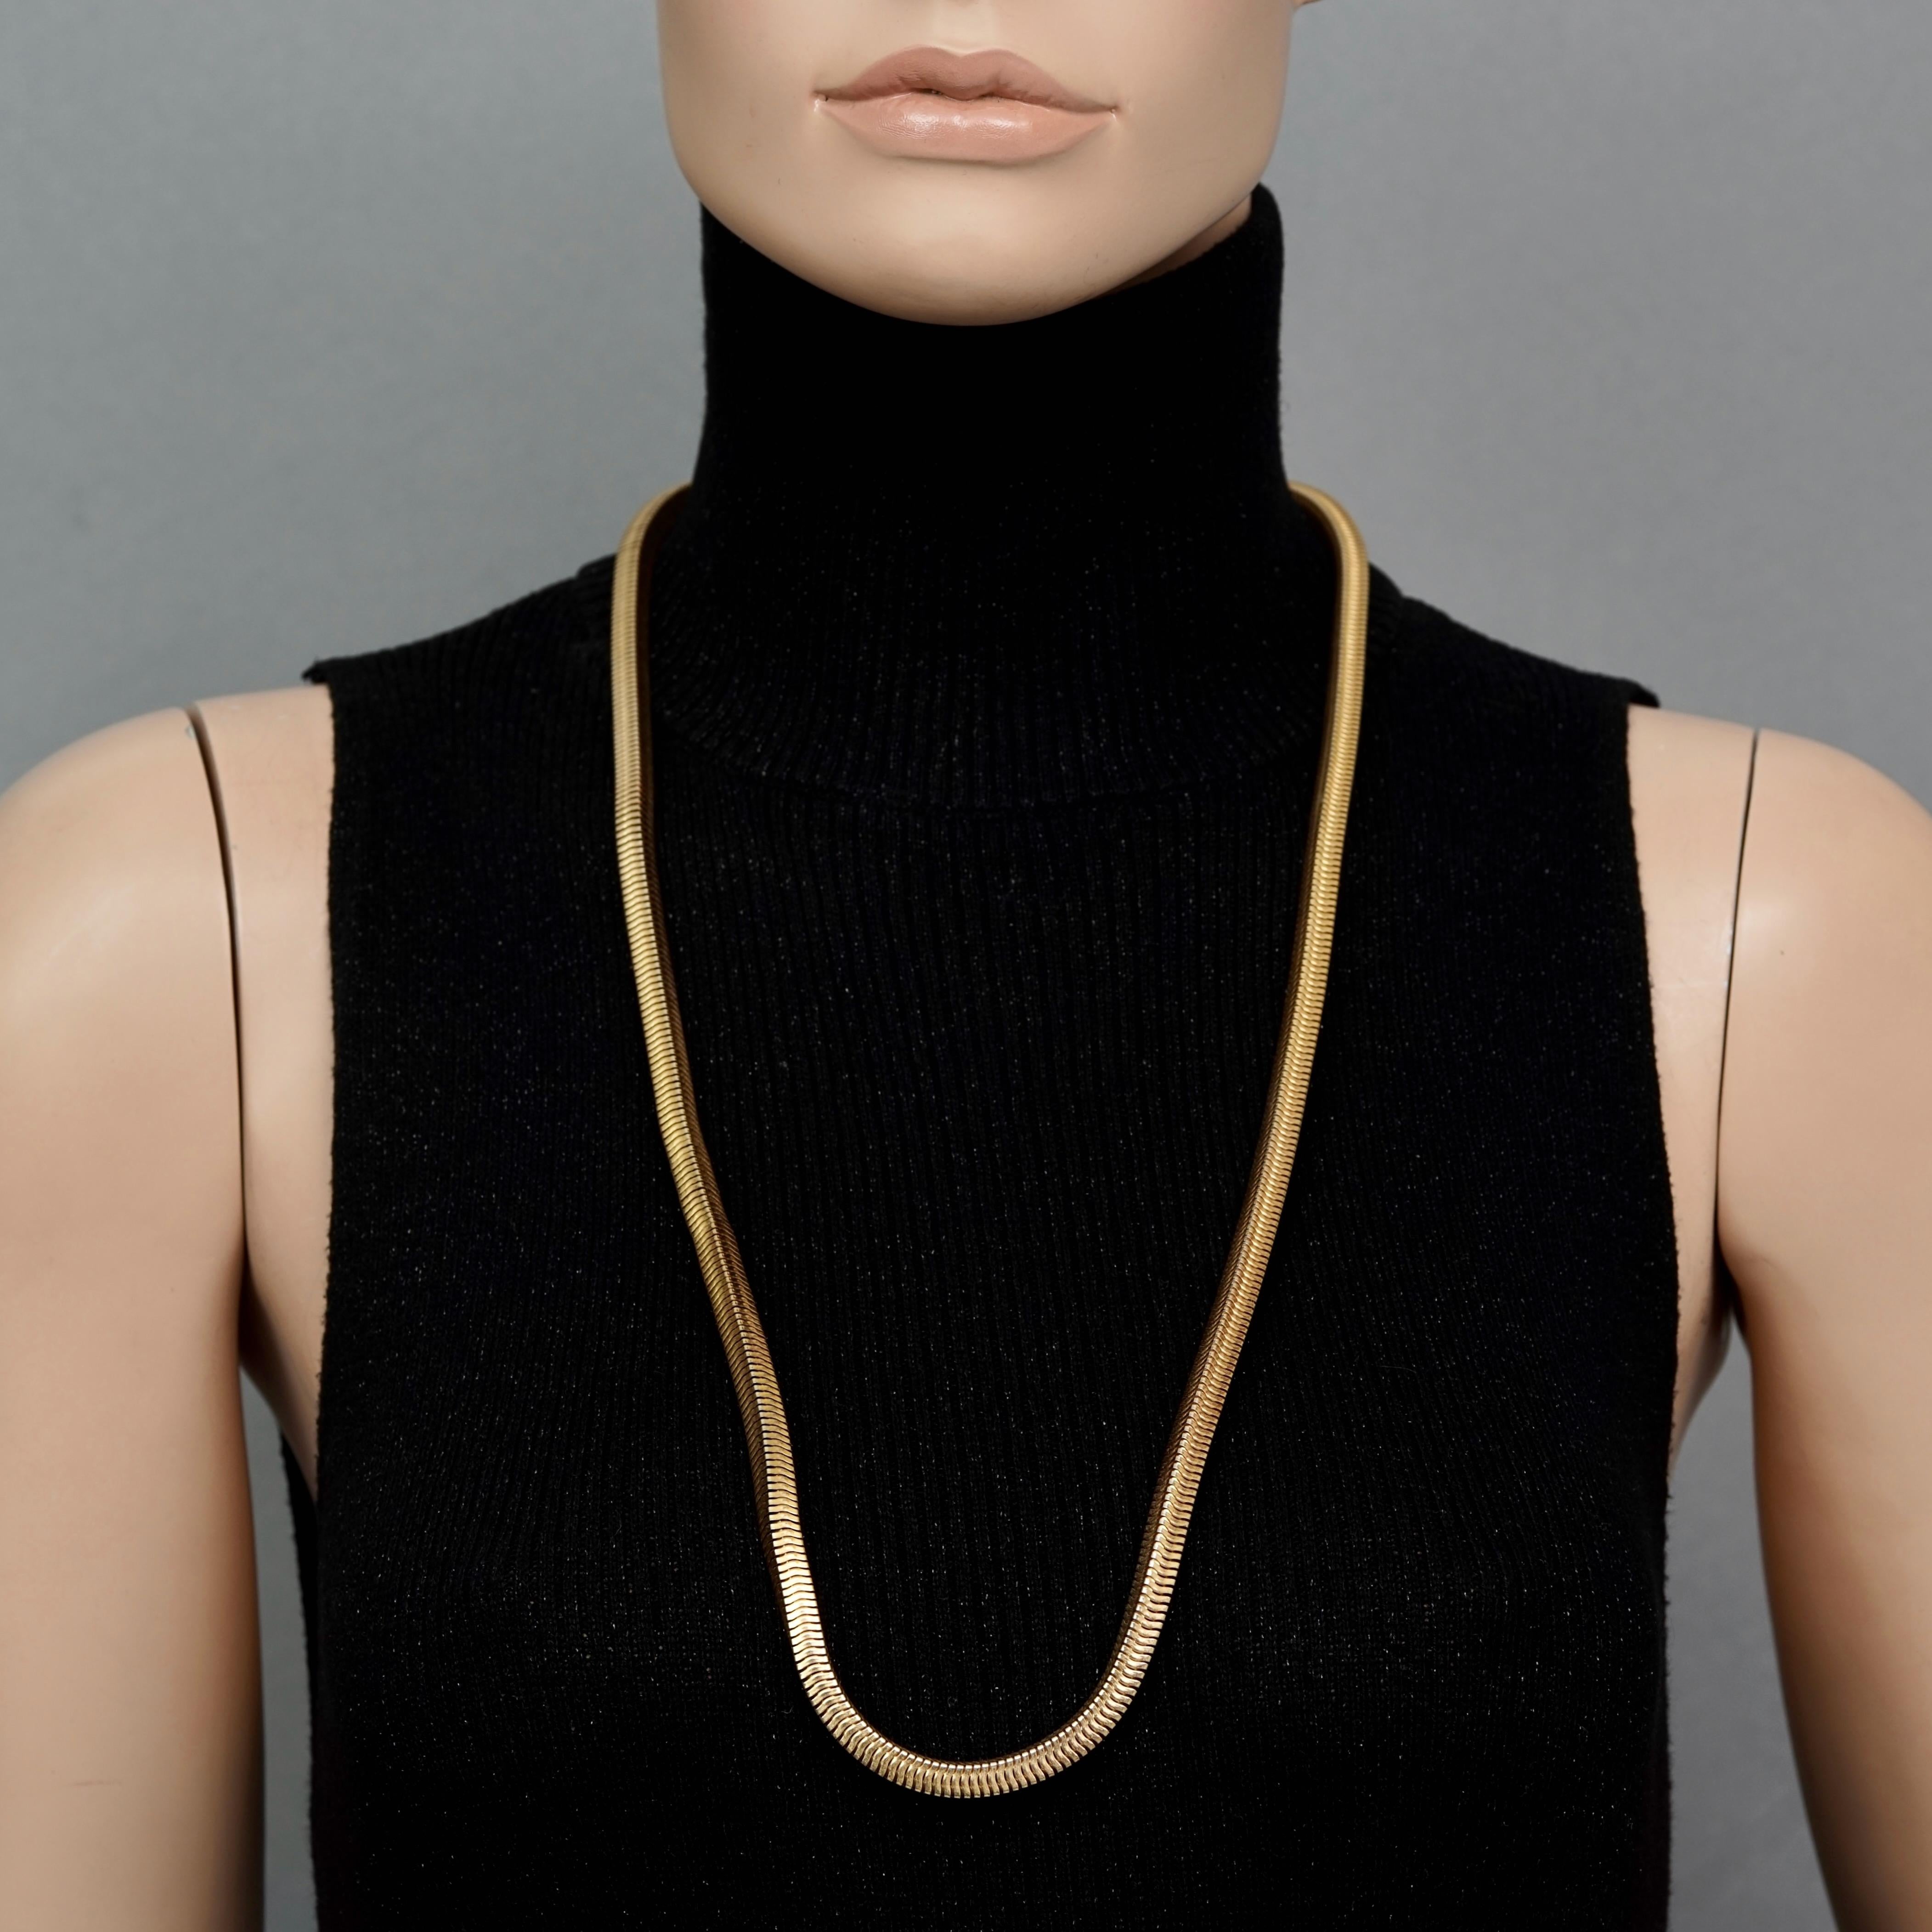 Vintage 1973 CHRISTIAN DIOR Gold Snake Chain Necklace

Measurements:
Height: 0.23 inch (0.6 cm)
Wearable Length: 32.28 inches (82 cm)

Features:
- 100% Authentic CHRISTIAN DIOR.
- Long snake chain necklace.
- Gold tone hardware.
- Signed 1973 CHR